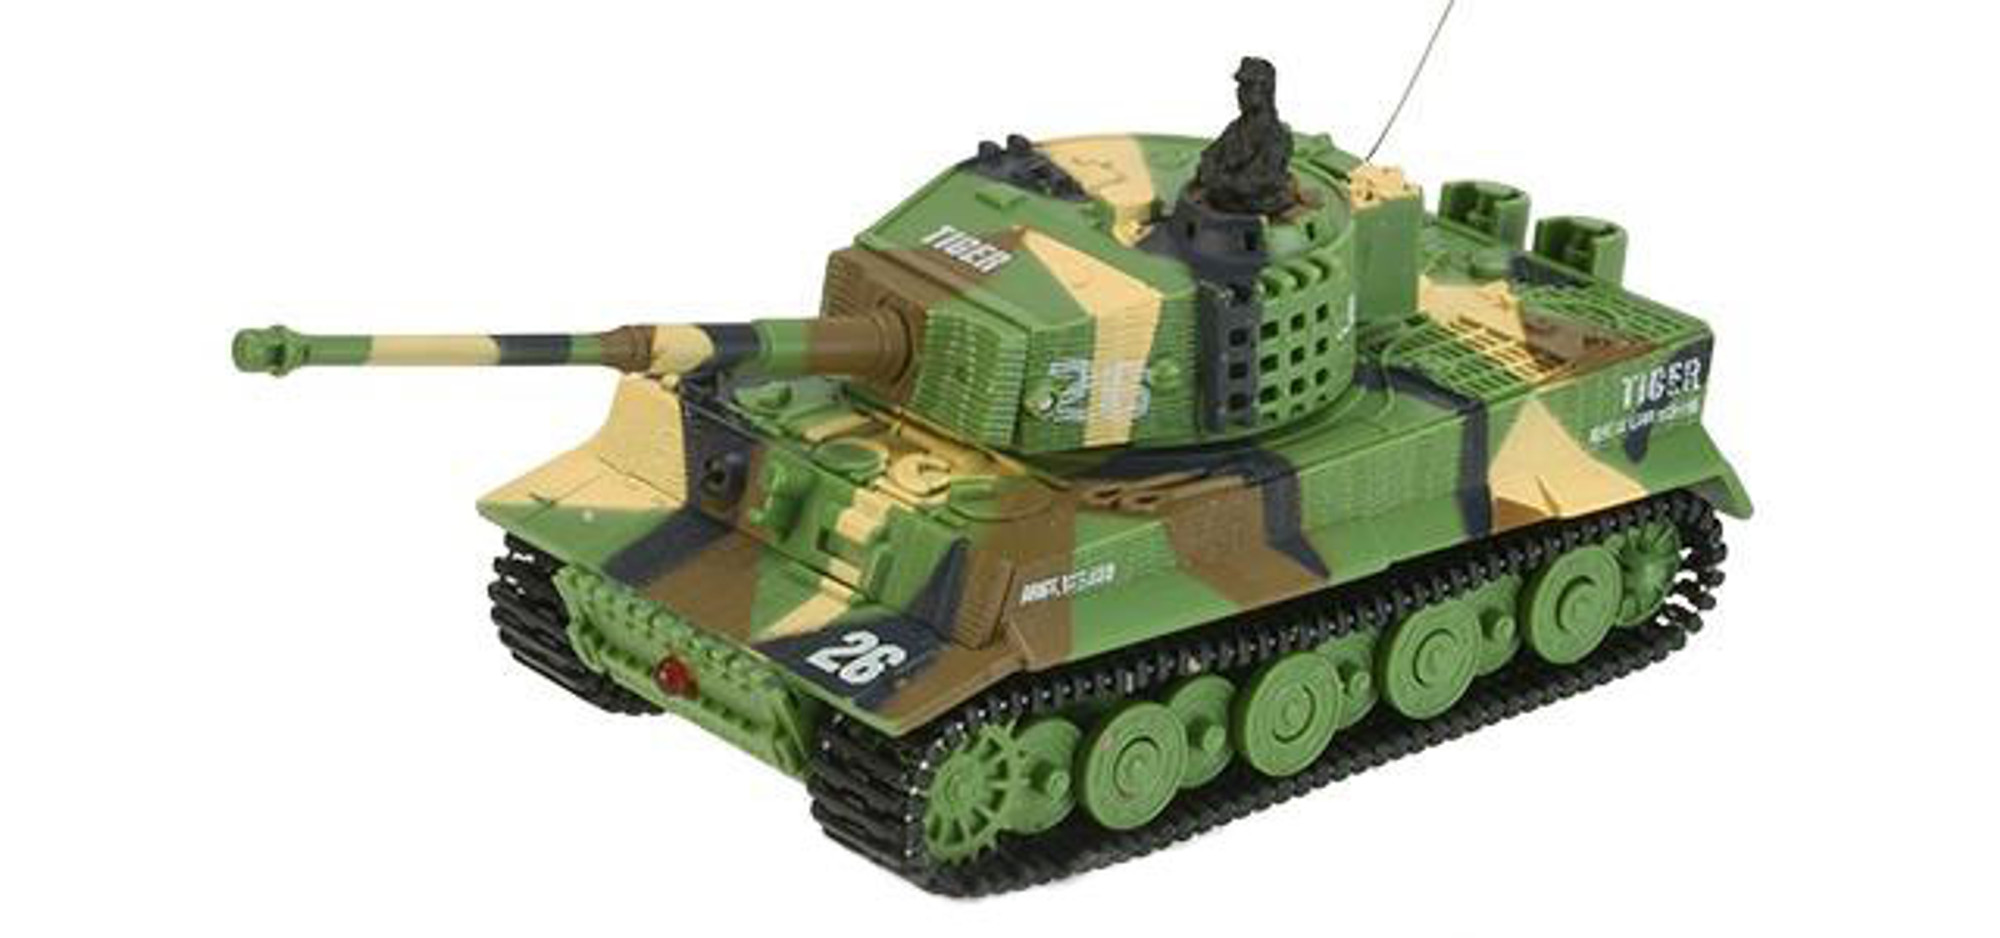 Armor Corps 1:72 Scale RC Battle Tank - Tiger (Color: Woodland)